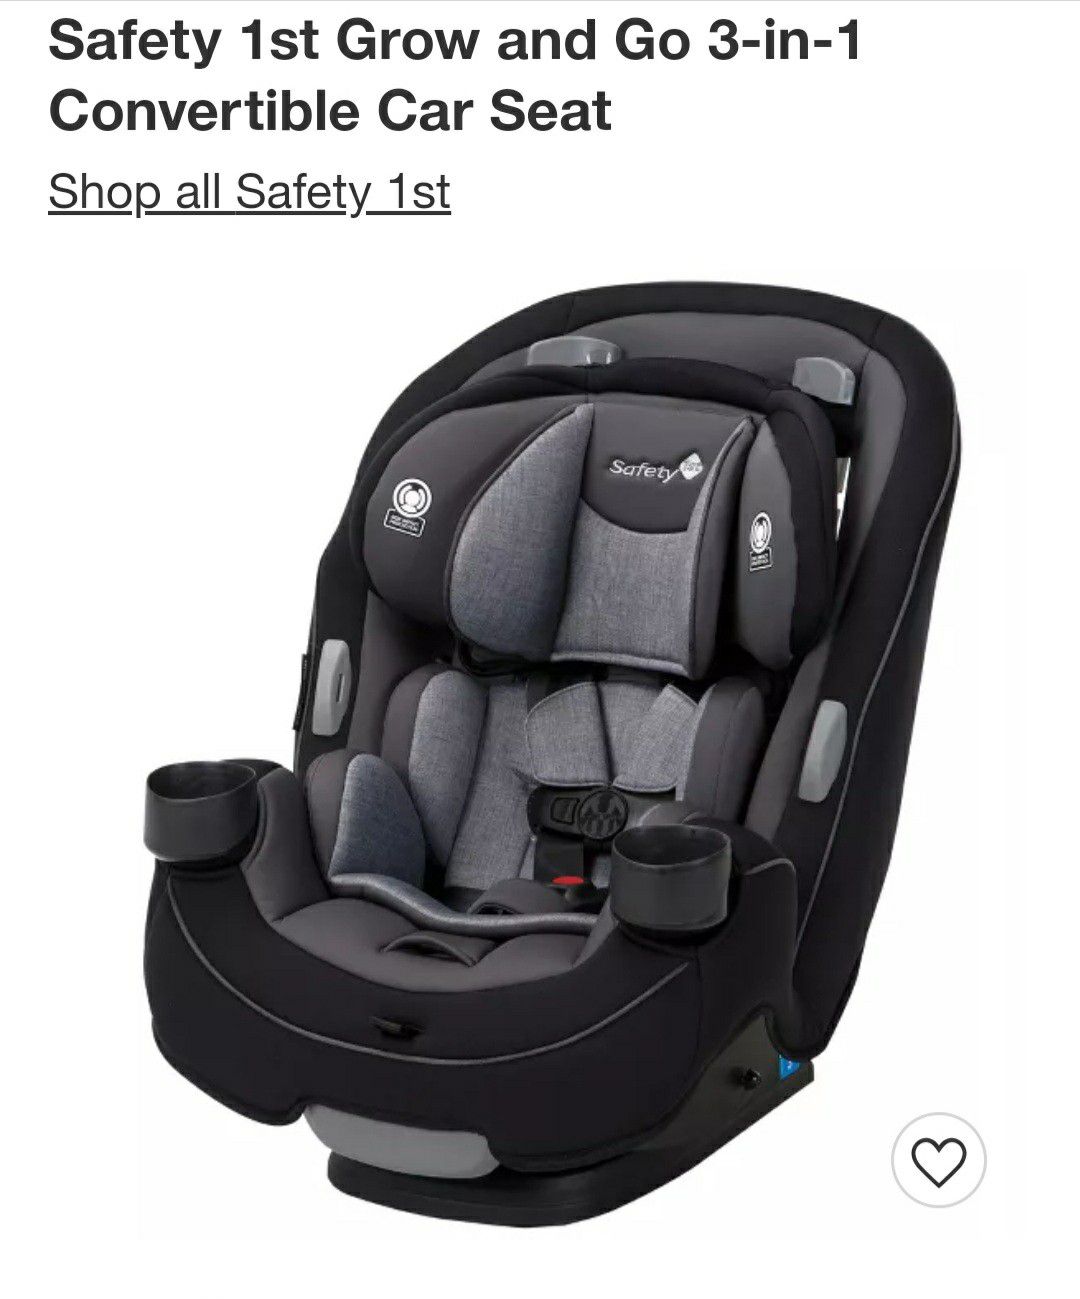 Safety 1st convertible carseat 3 in 1